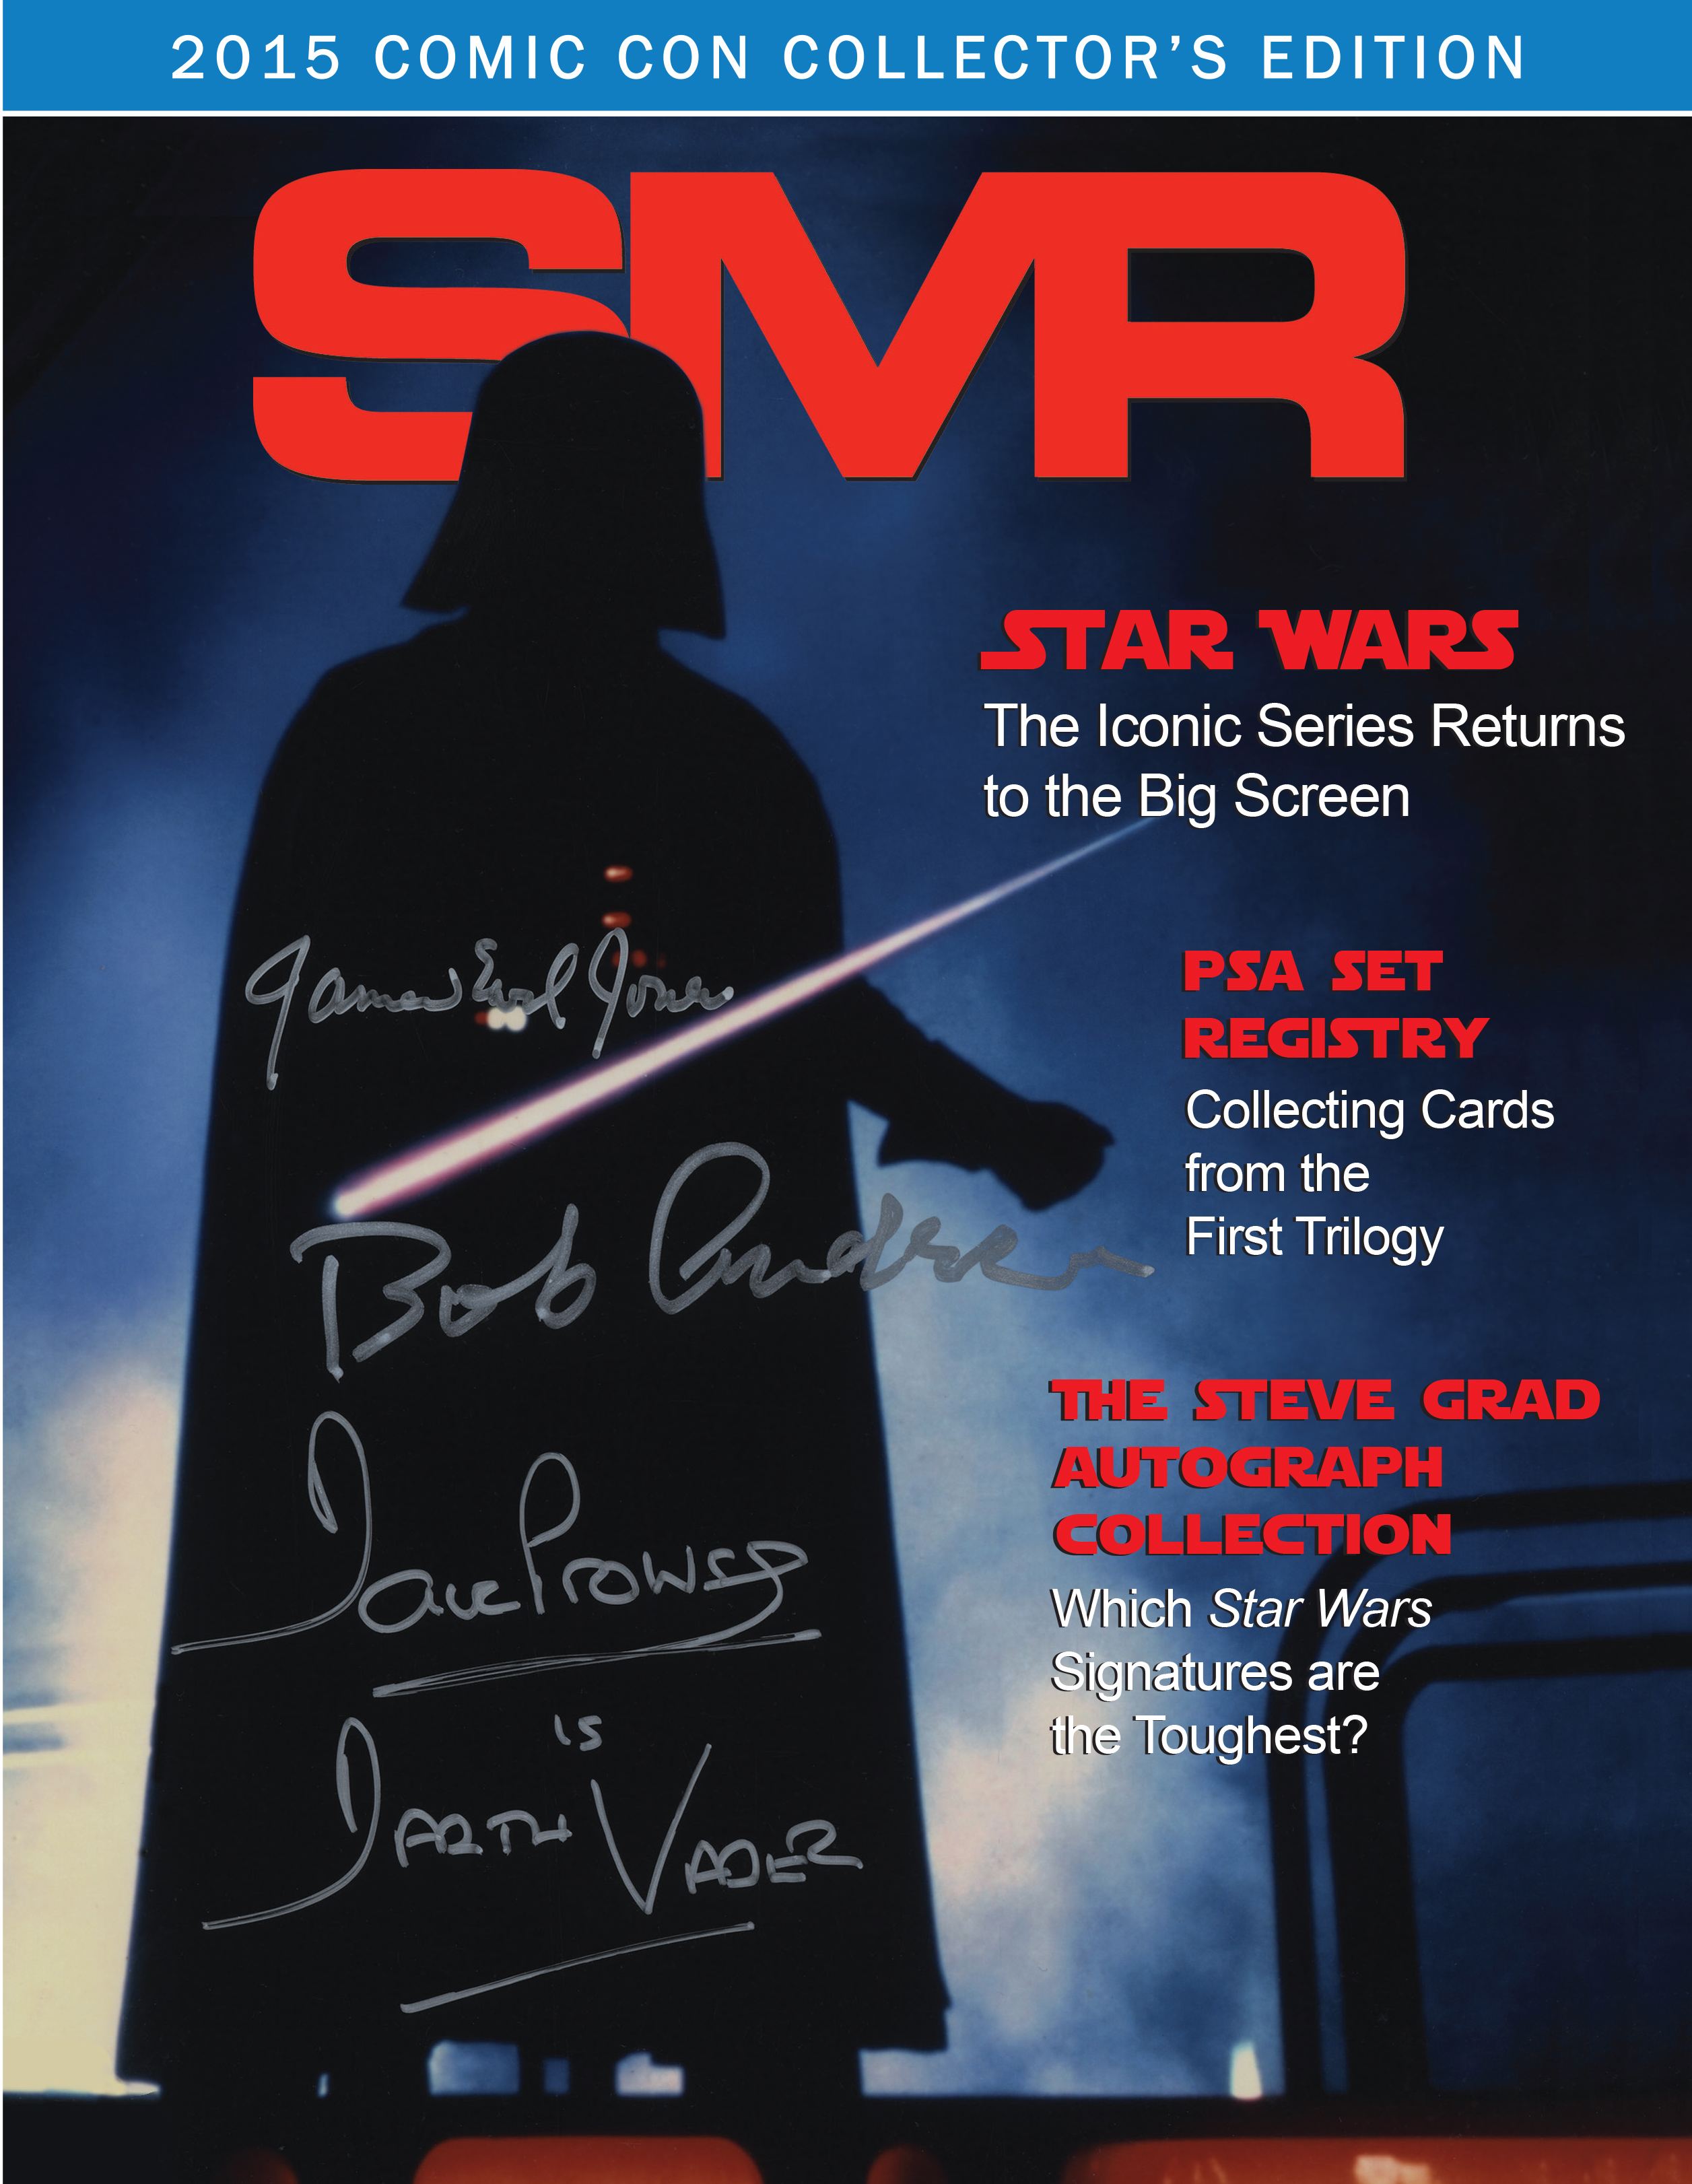 While supplies last visitors to the PSA booth at the San Diego ComicCon can receive a free copy of SMR magazine that contains informative stories about Star Wars collectibles.